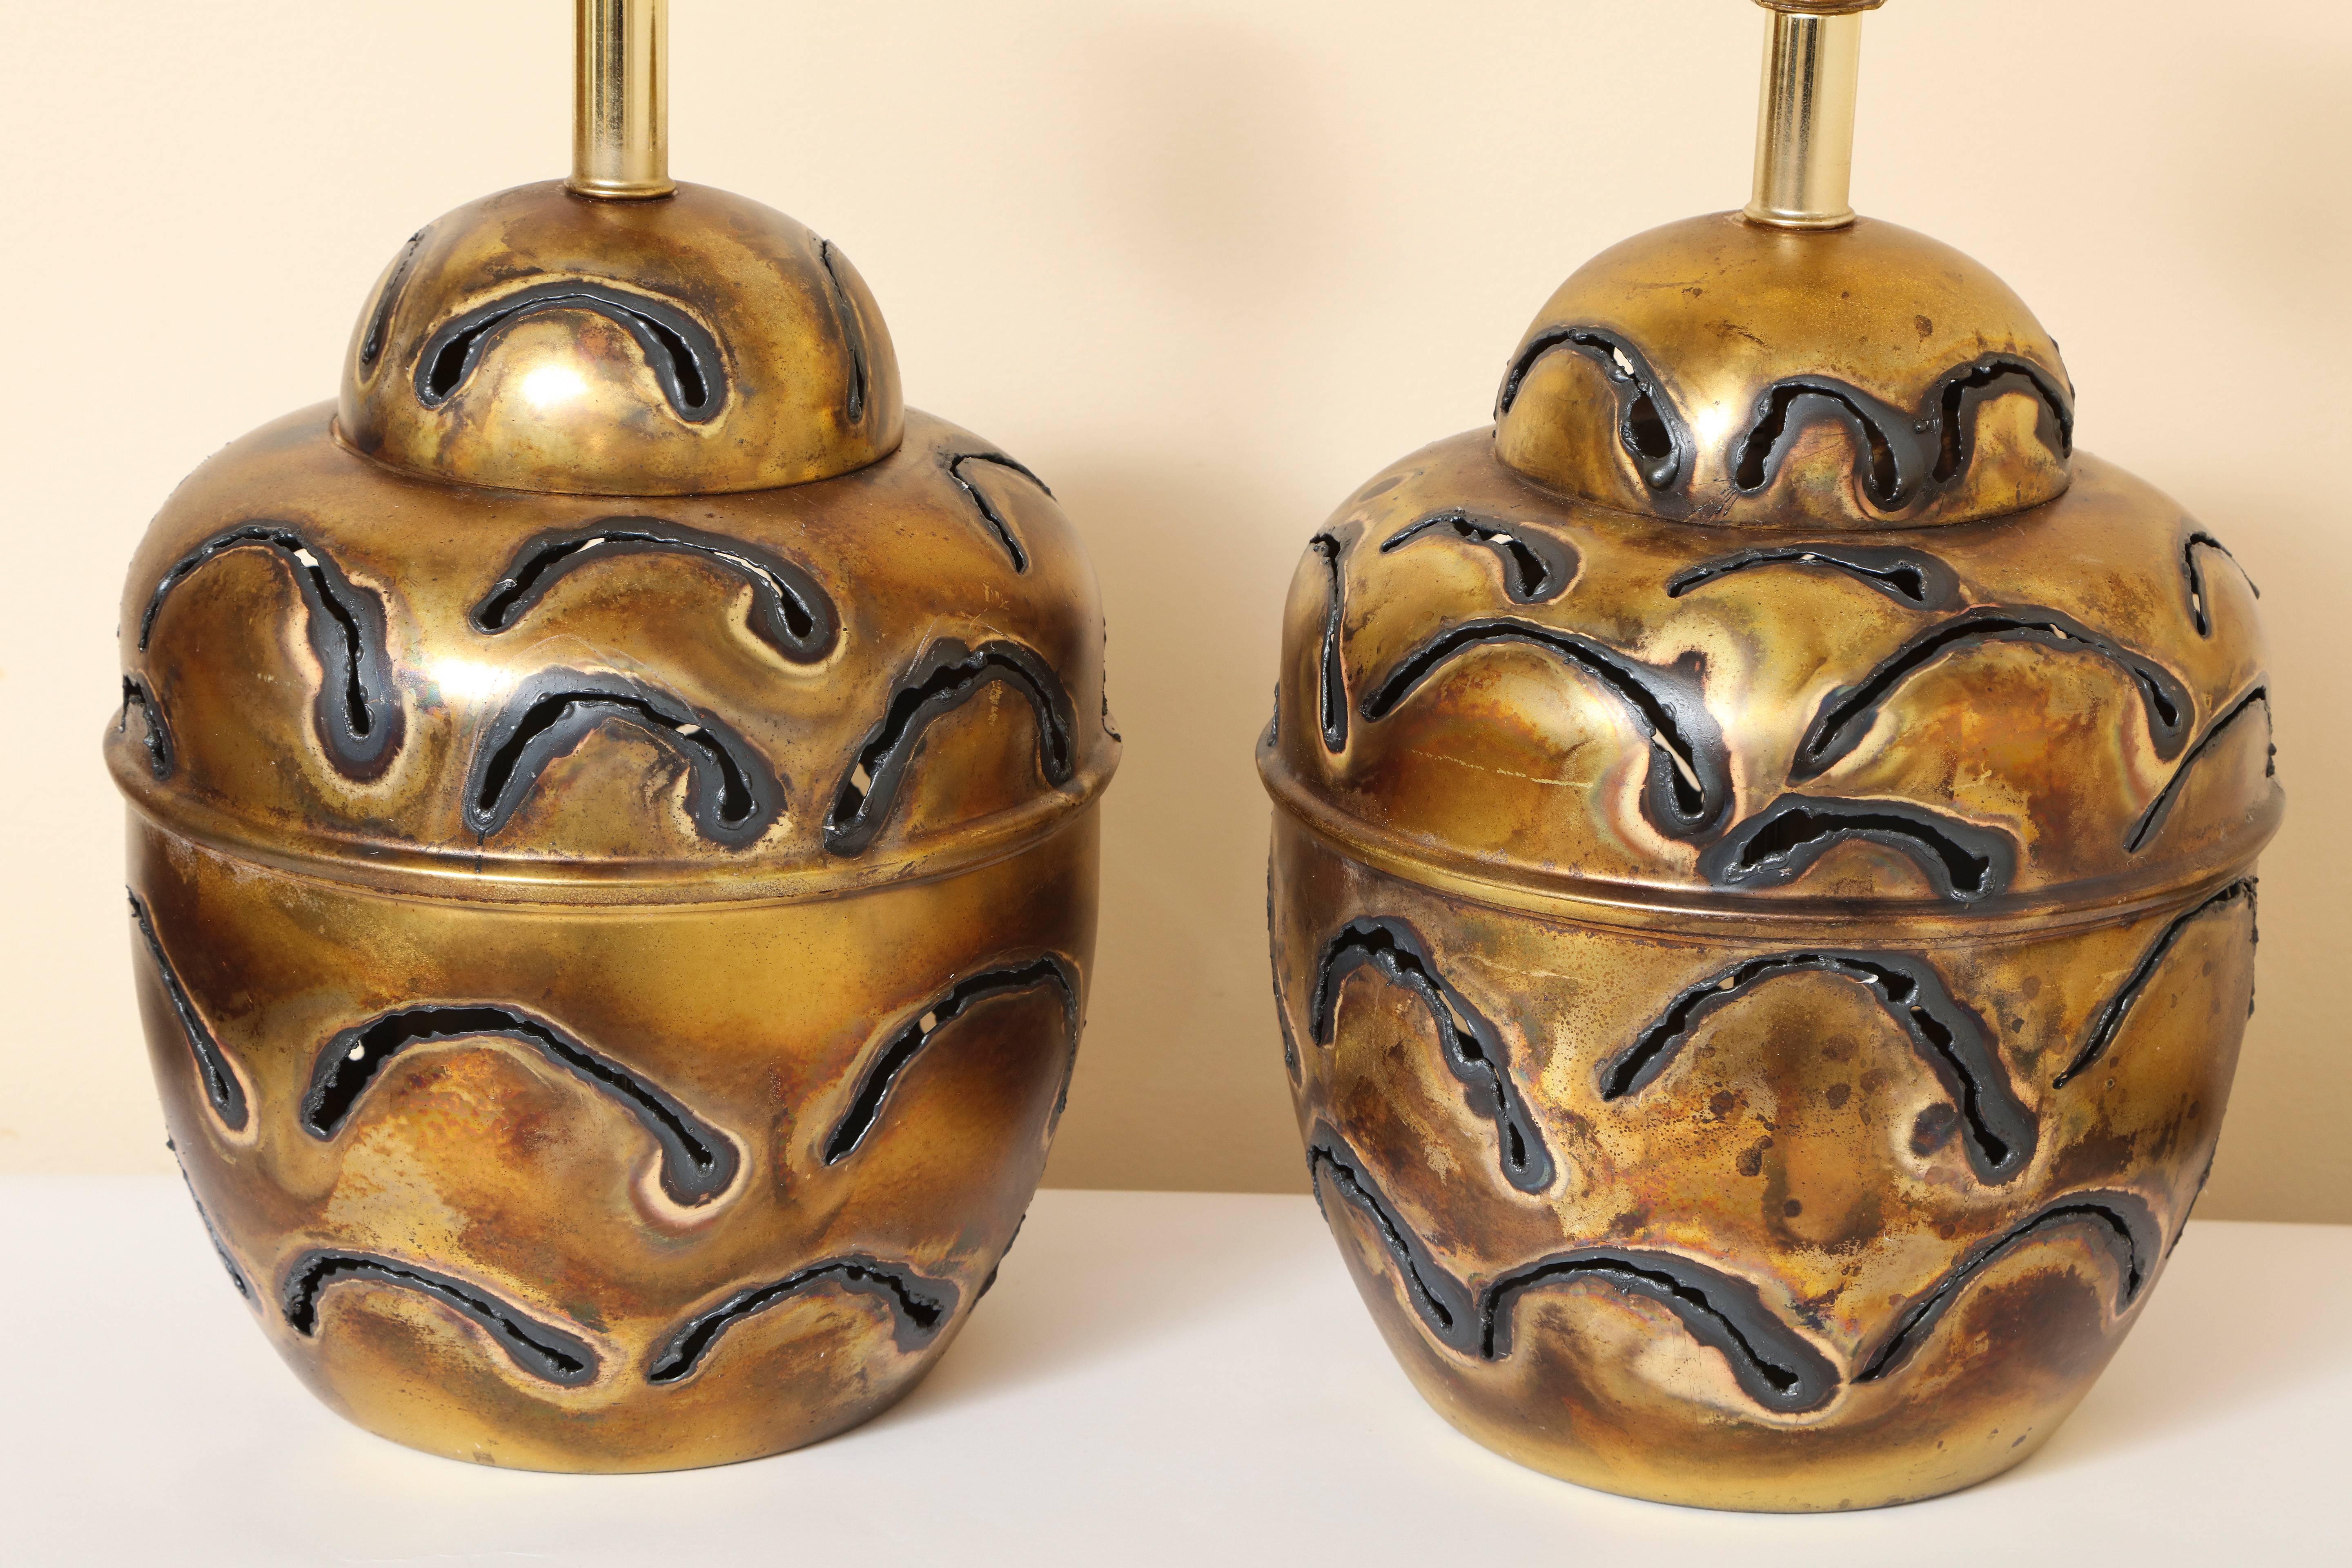 Pair of Ginger Jar Form Brutalist Welded Metal Table Lamps with Pierced Design 3